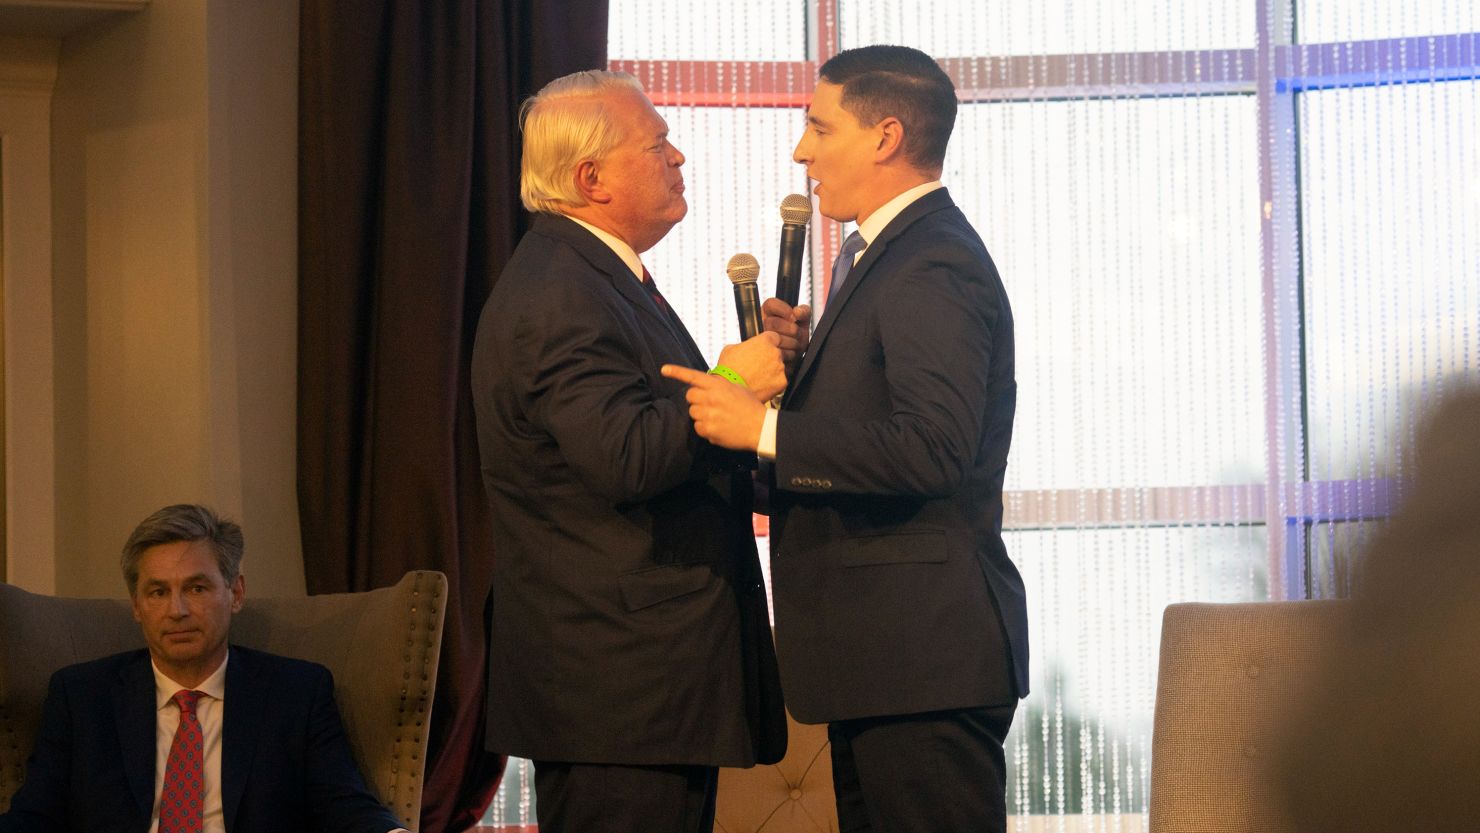 Ohio Republican Senate candidates Mike Gibbons, left, and Josh Mandel argue at a debate in Gahanna, Ohio, on March 18, 2022.